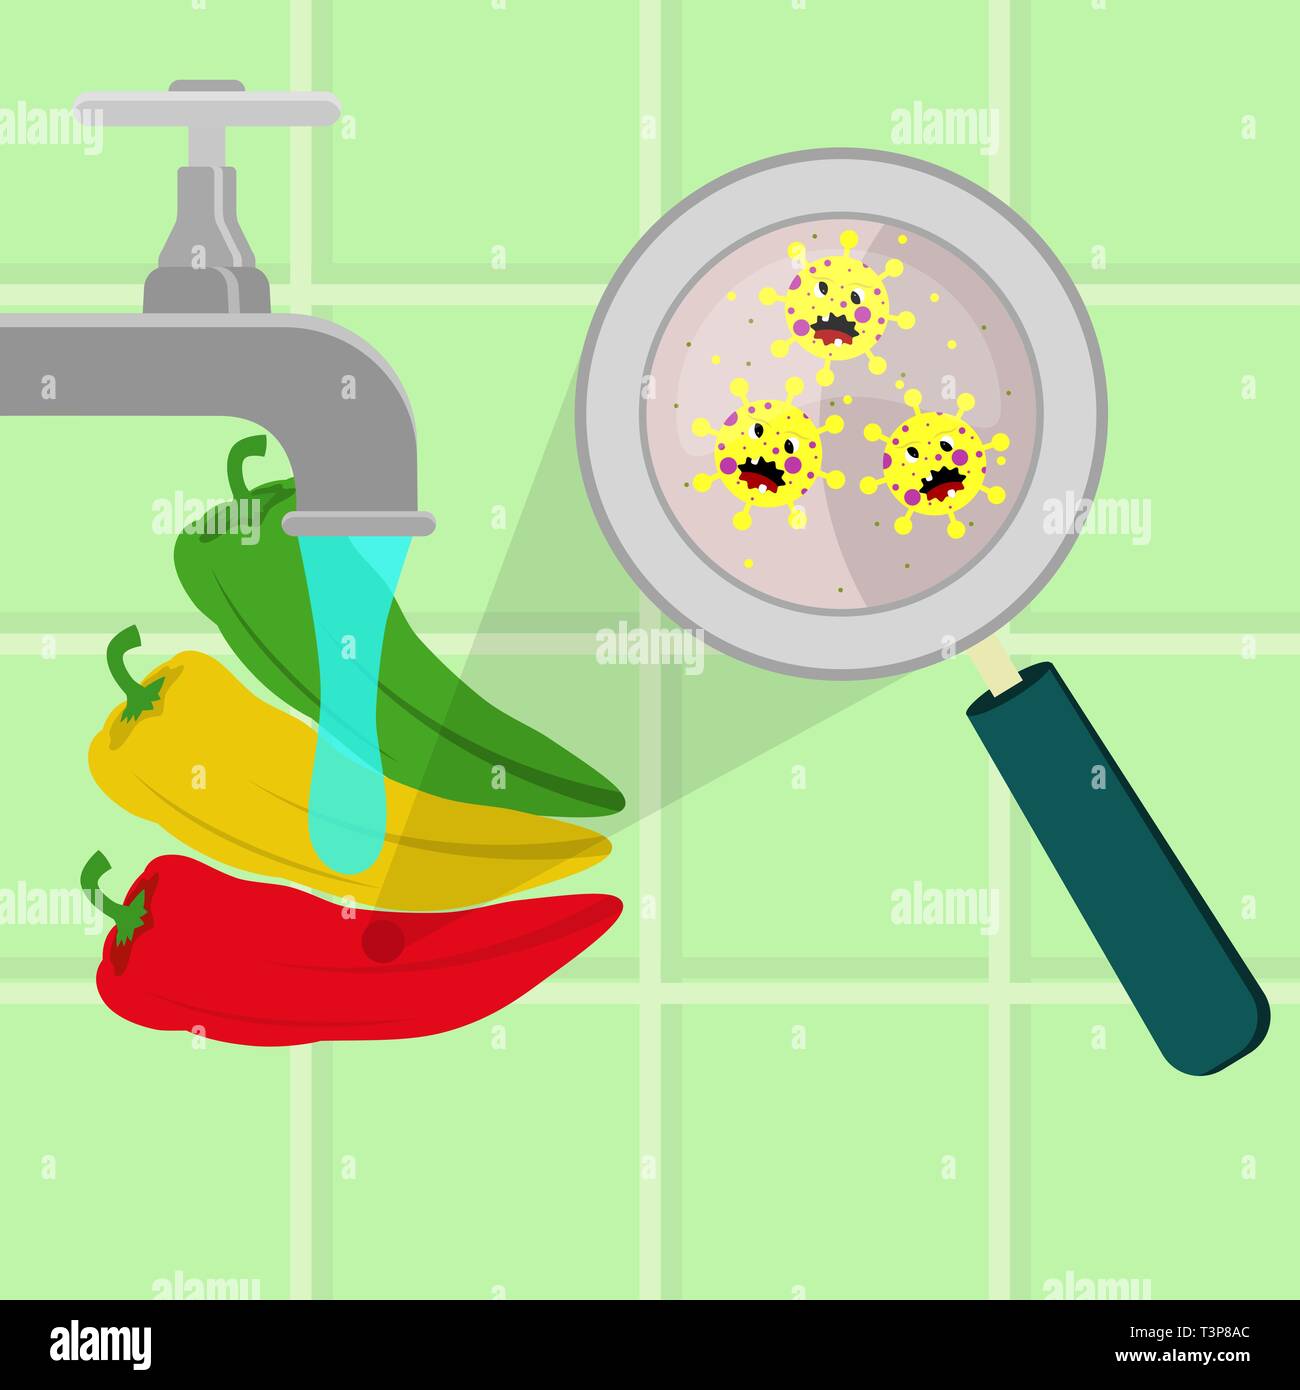 Chilli pepper contaminated with cartoon microbes being cleaned and washed in a kitchen. Microorganisms, virus and bacteria in the vegetable enlarged b Stock Vector